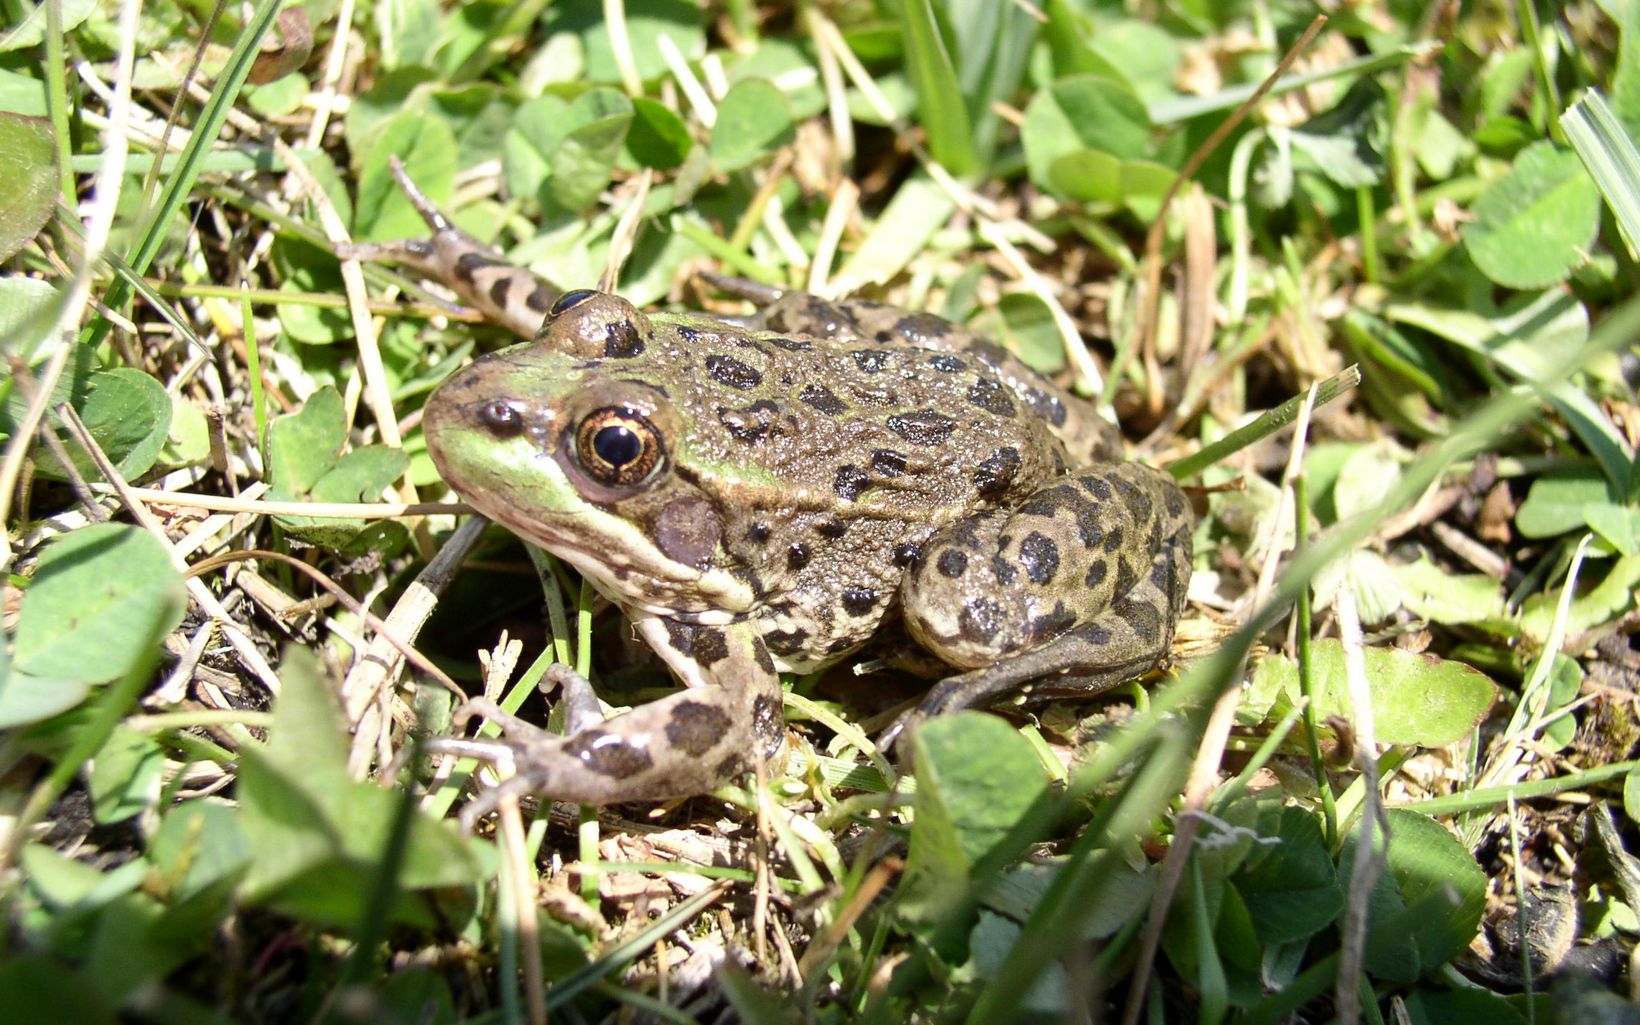 
                
                  Chiricahua leopard frog Threatened species of interest to The Nature Conservancy, shown here camouflaged against green foliage.
                  © Sue Sitko/The Nature Conservancy
                
              